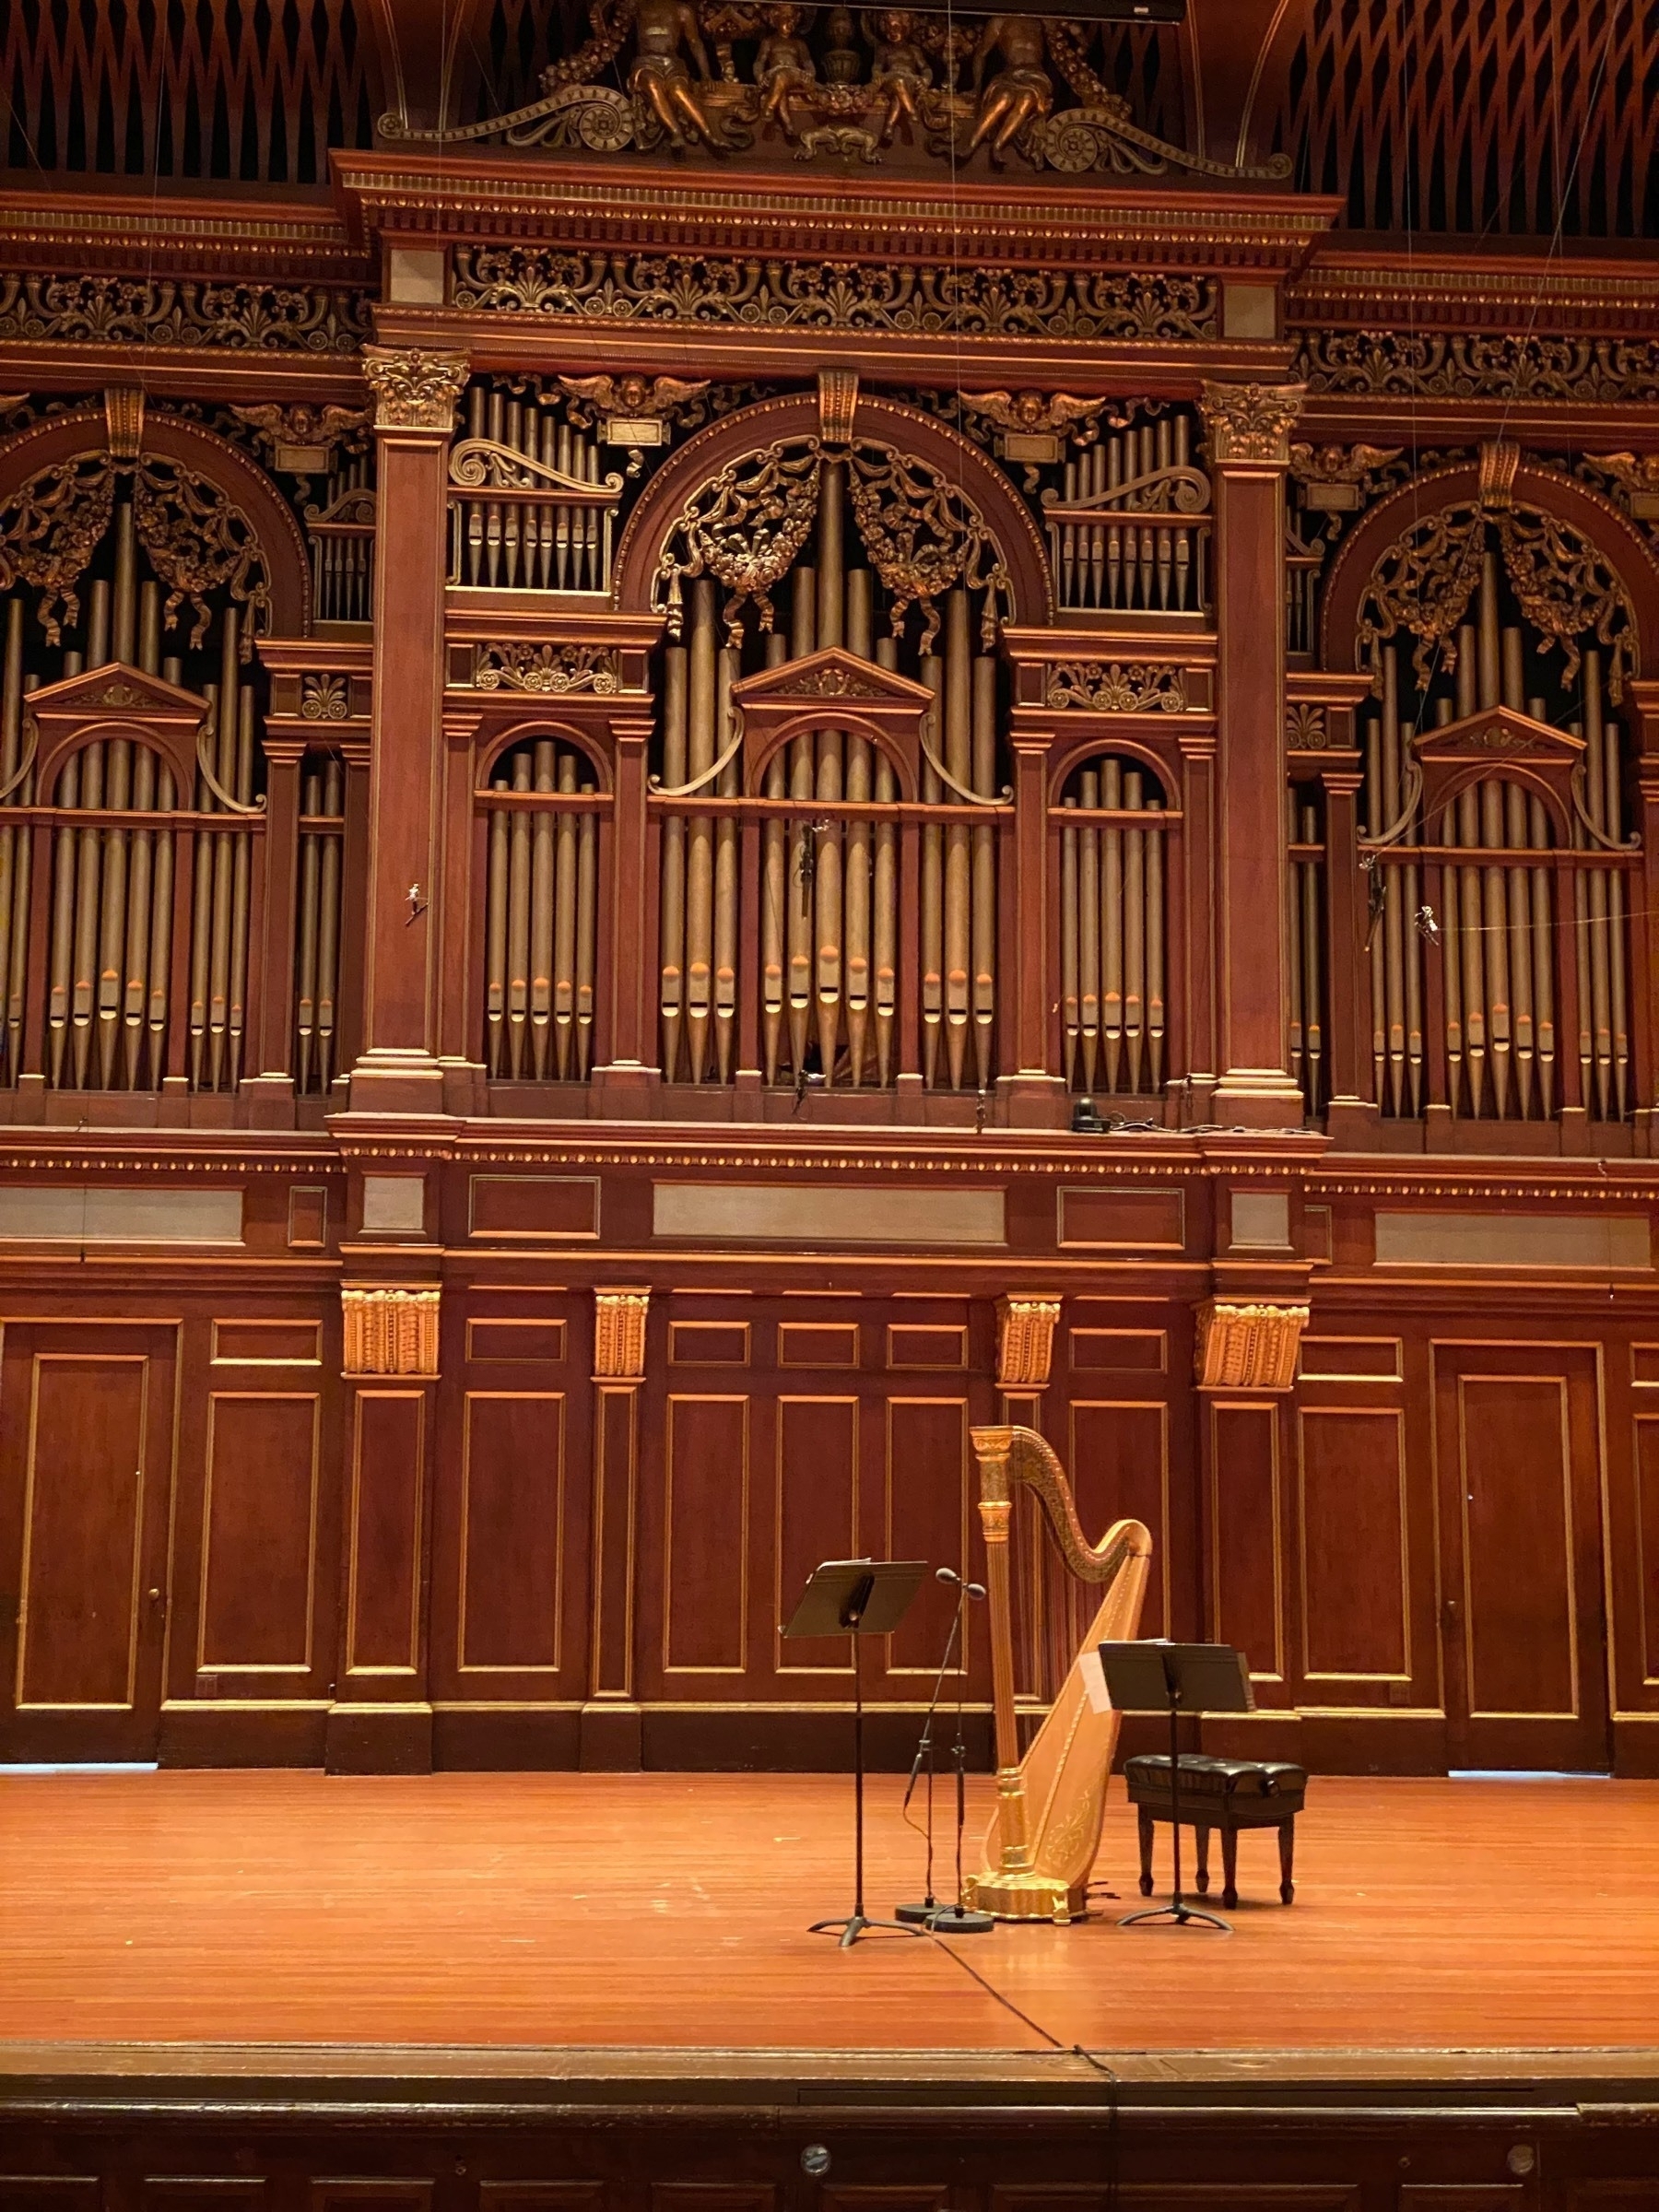 Stage with a large harp and music stands, a large pipe organ built into the rear wall.